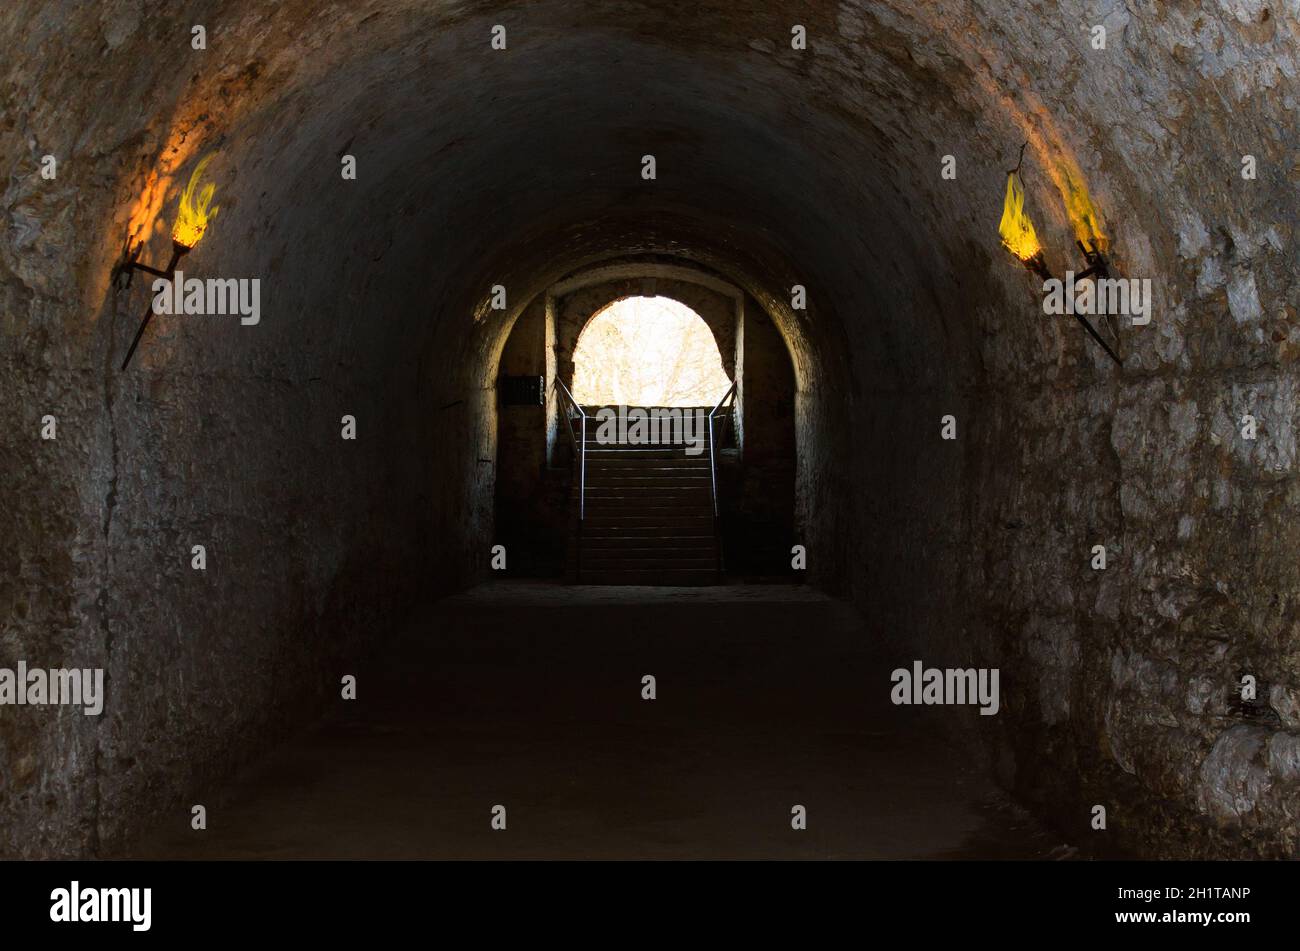 catacombs of the old castle illuminated burning torches. Stock Photo